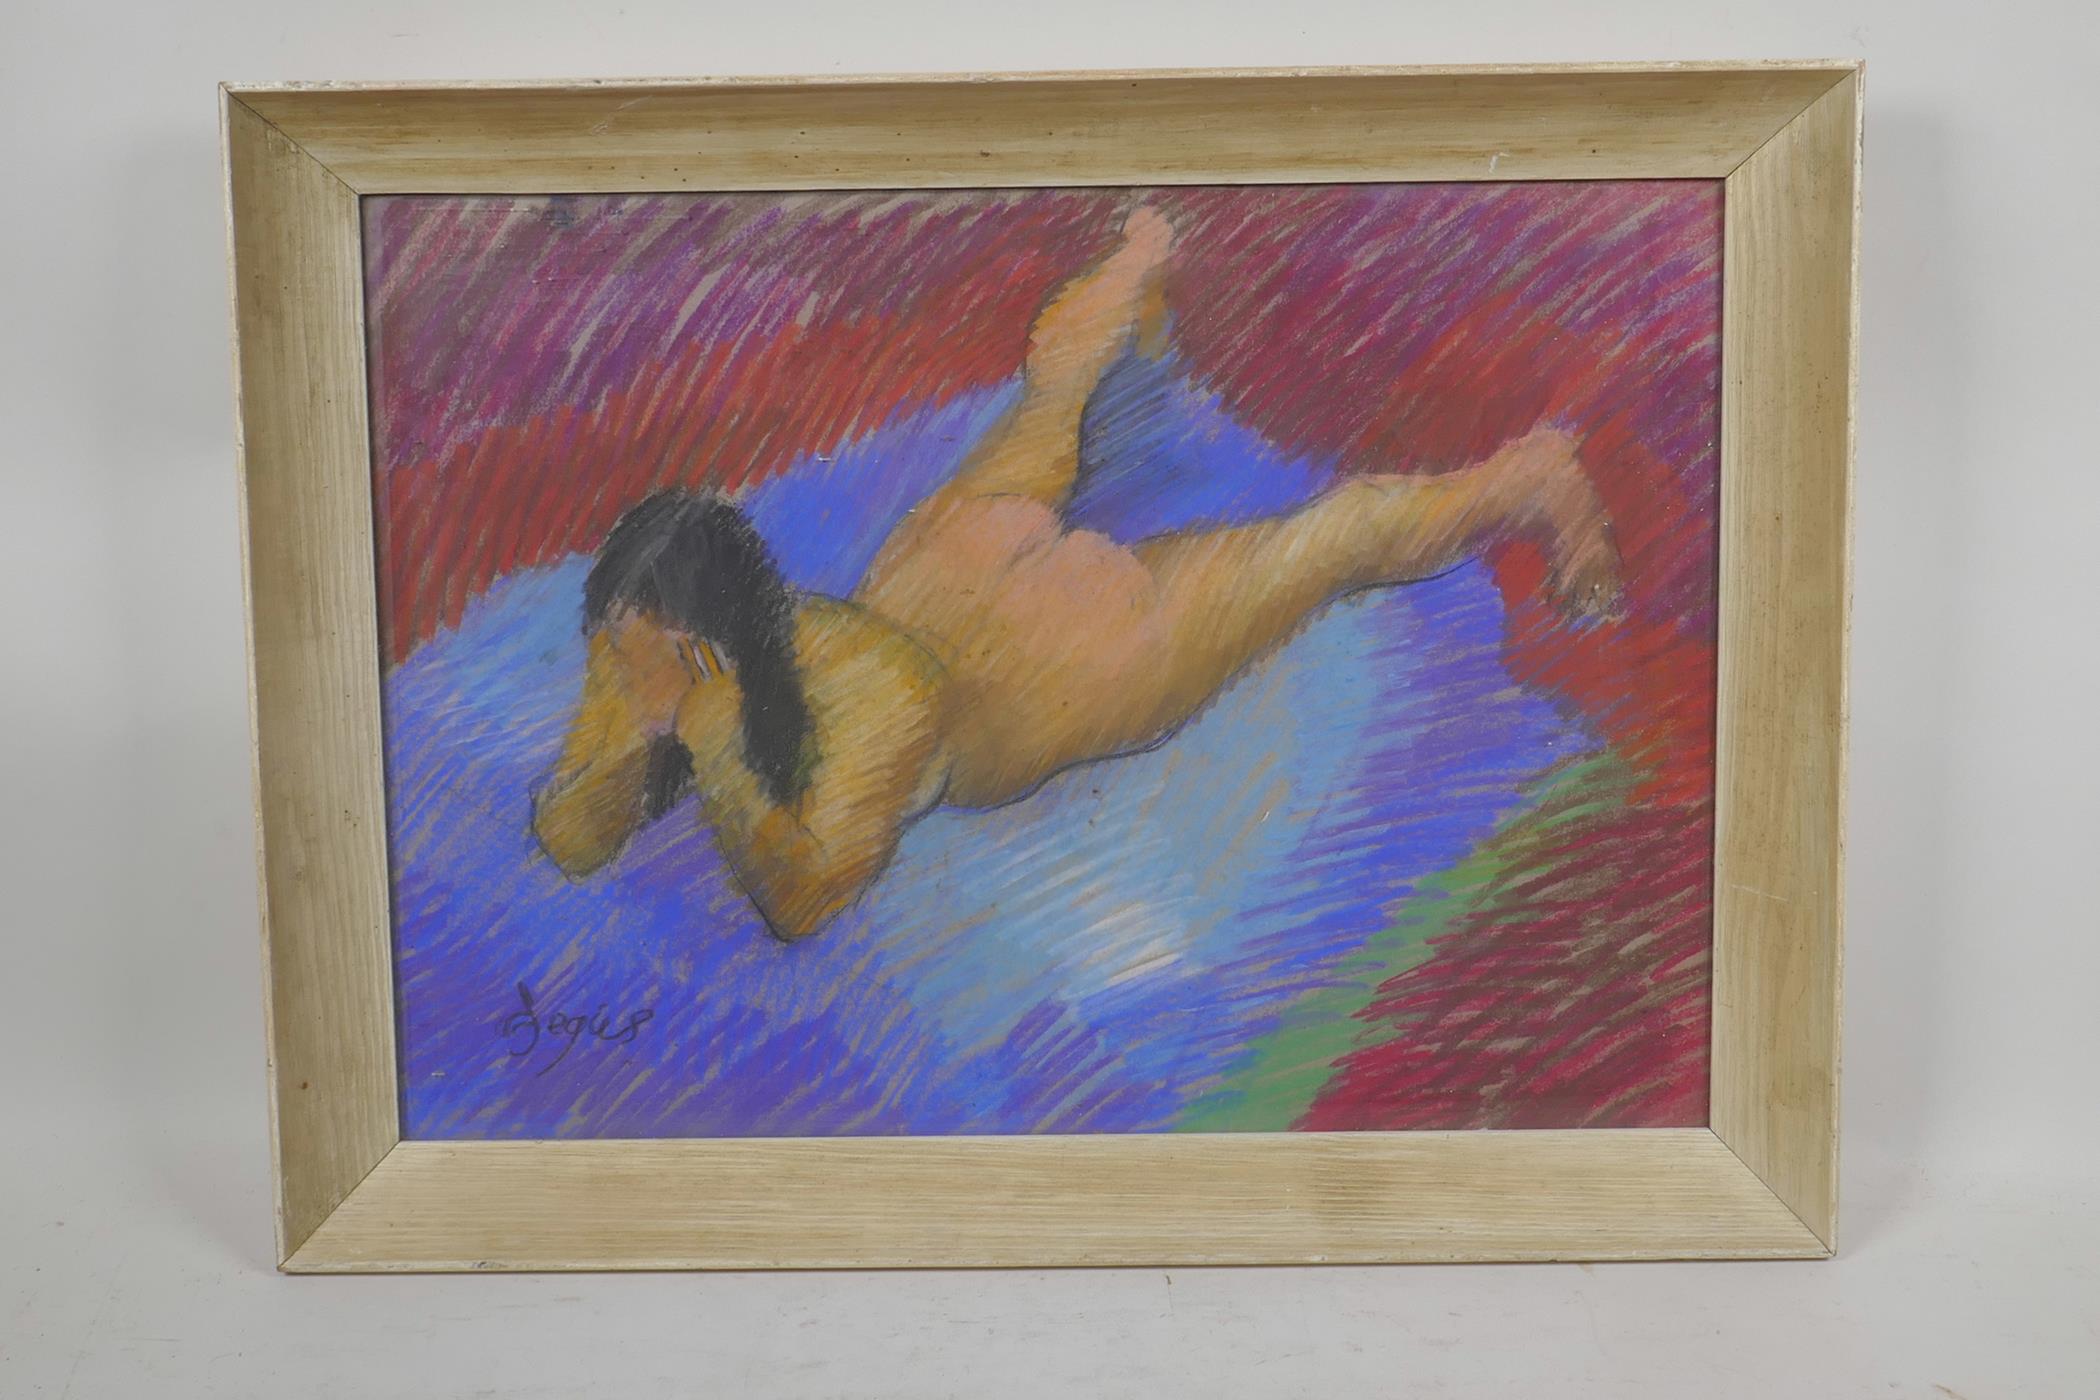 Sketch of a female nude, pastel on paper, 18" x 13" - Image 3 of 5